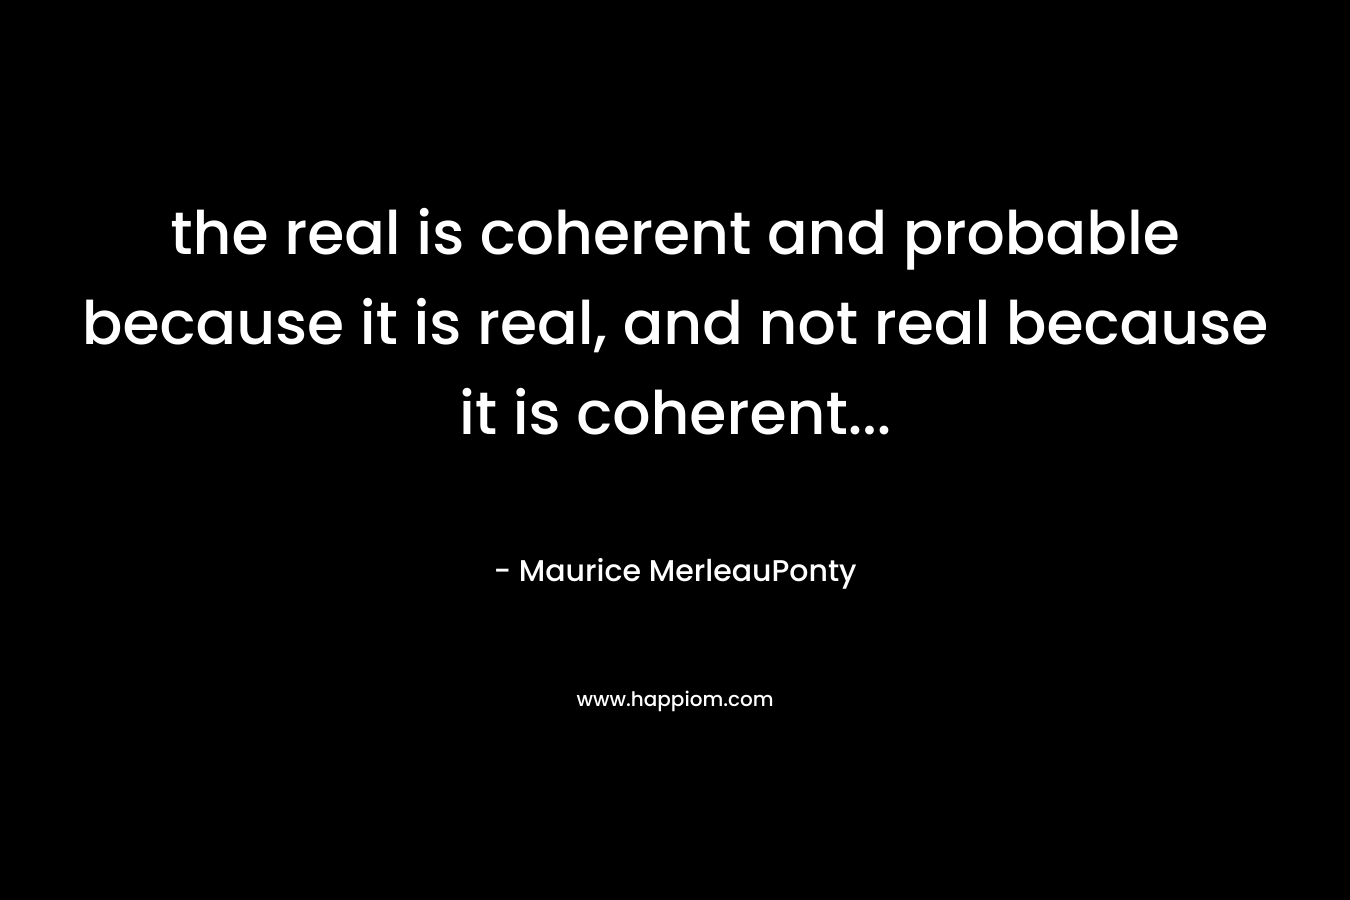 the real is coherent and probable because it is real, and not real because it is coherent… – Maurice MerleauPonty